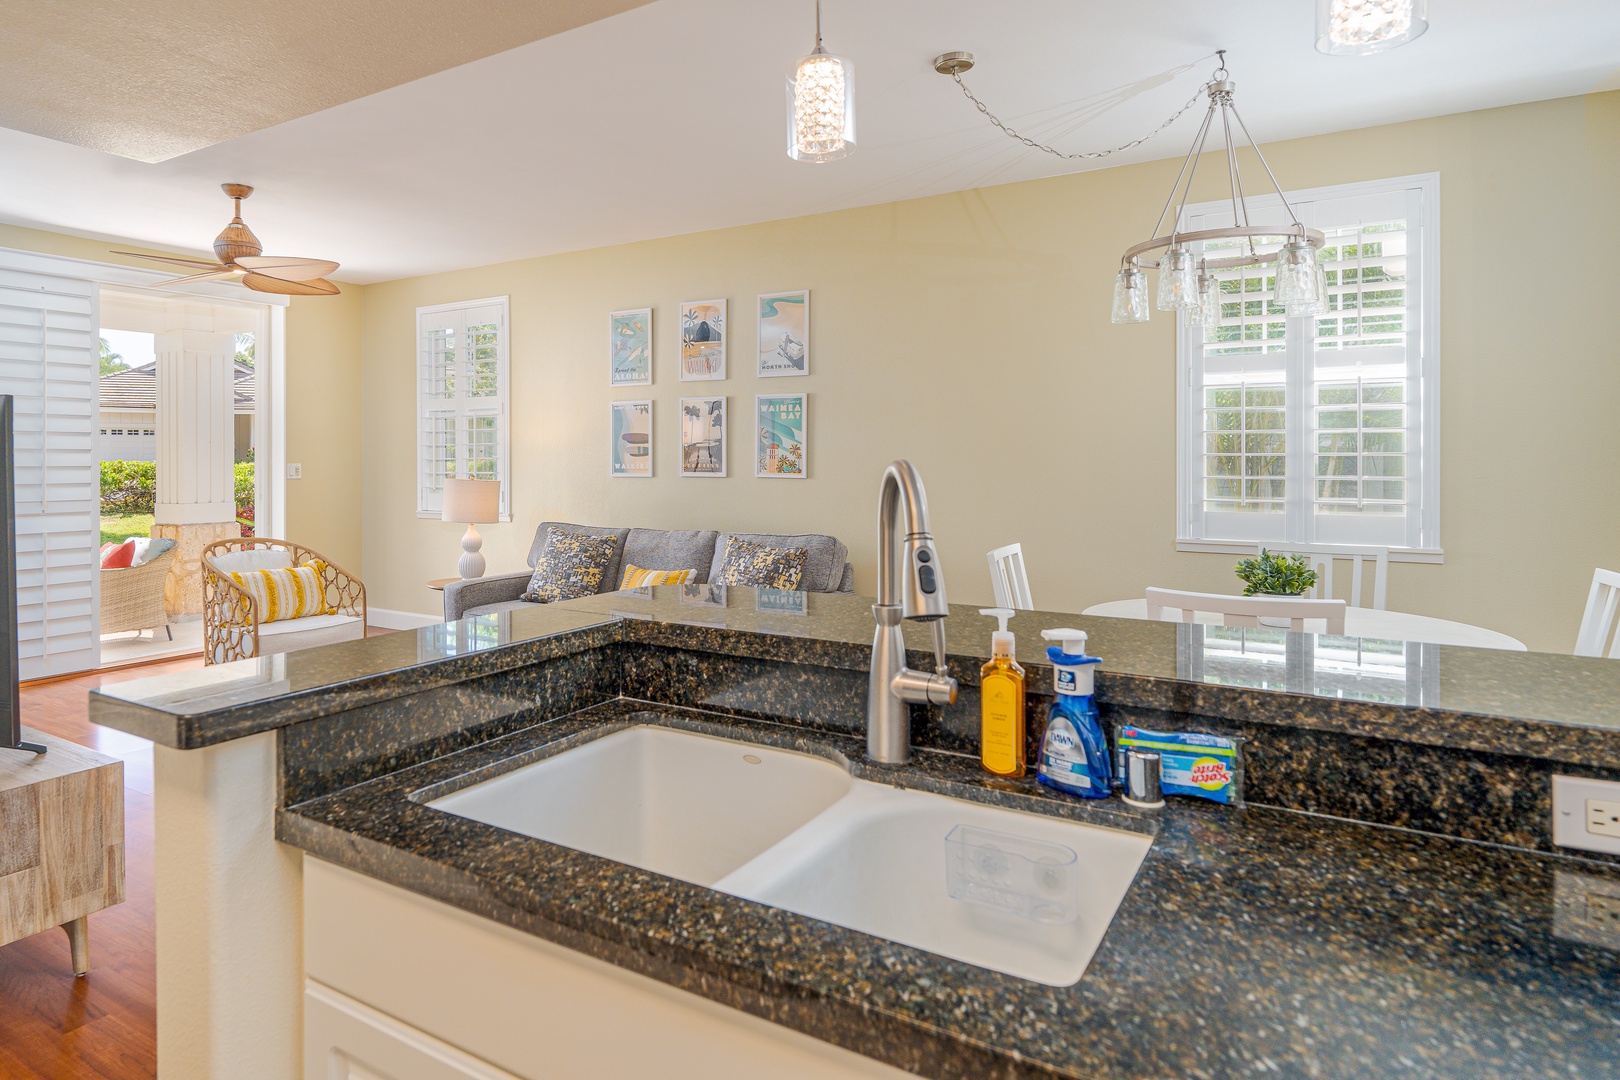 Kapolei Vacation Rentals, Ko Olina Kai 1105F - Kitchen with modern amenities and a spacious countertop for easy meal prep and gatherings.